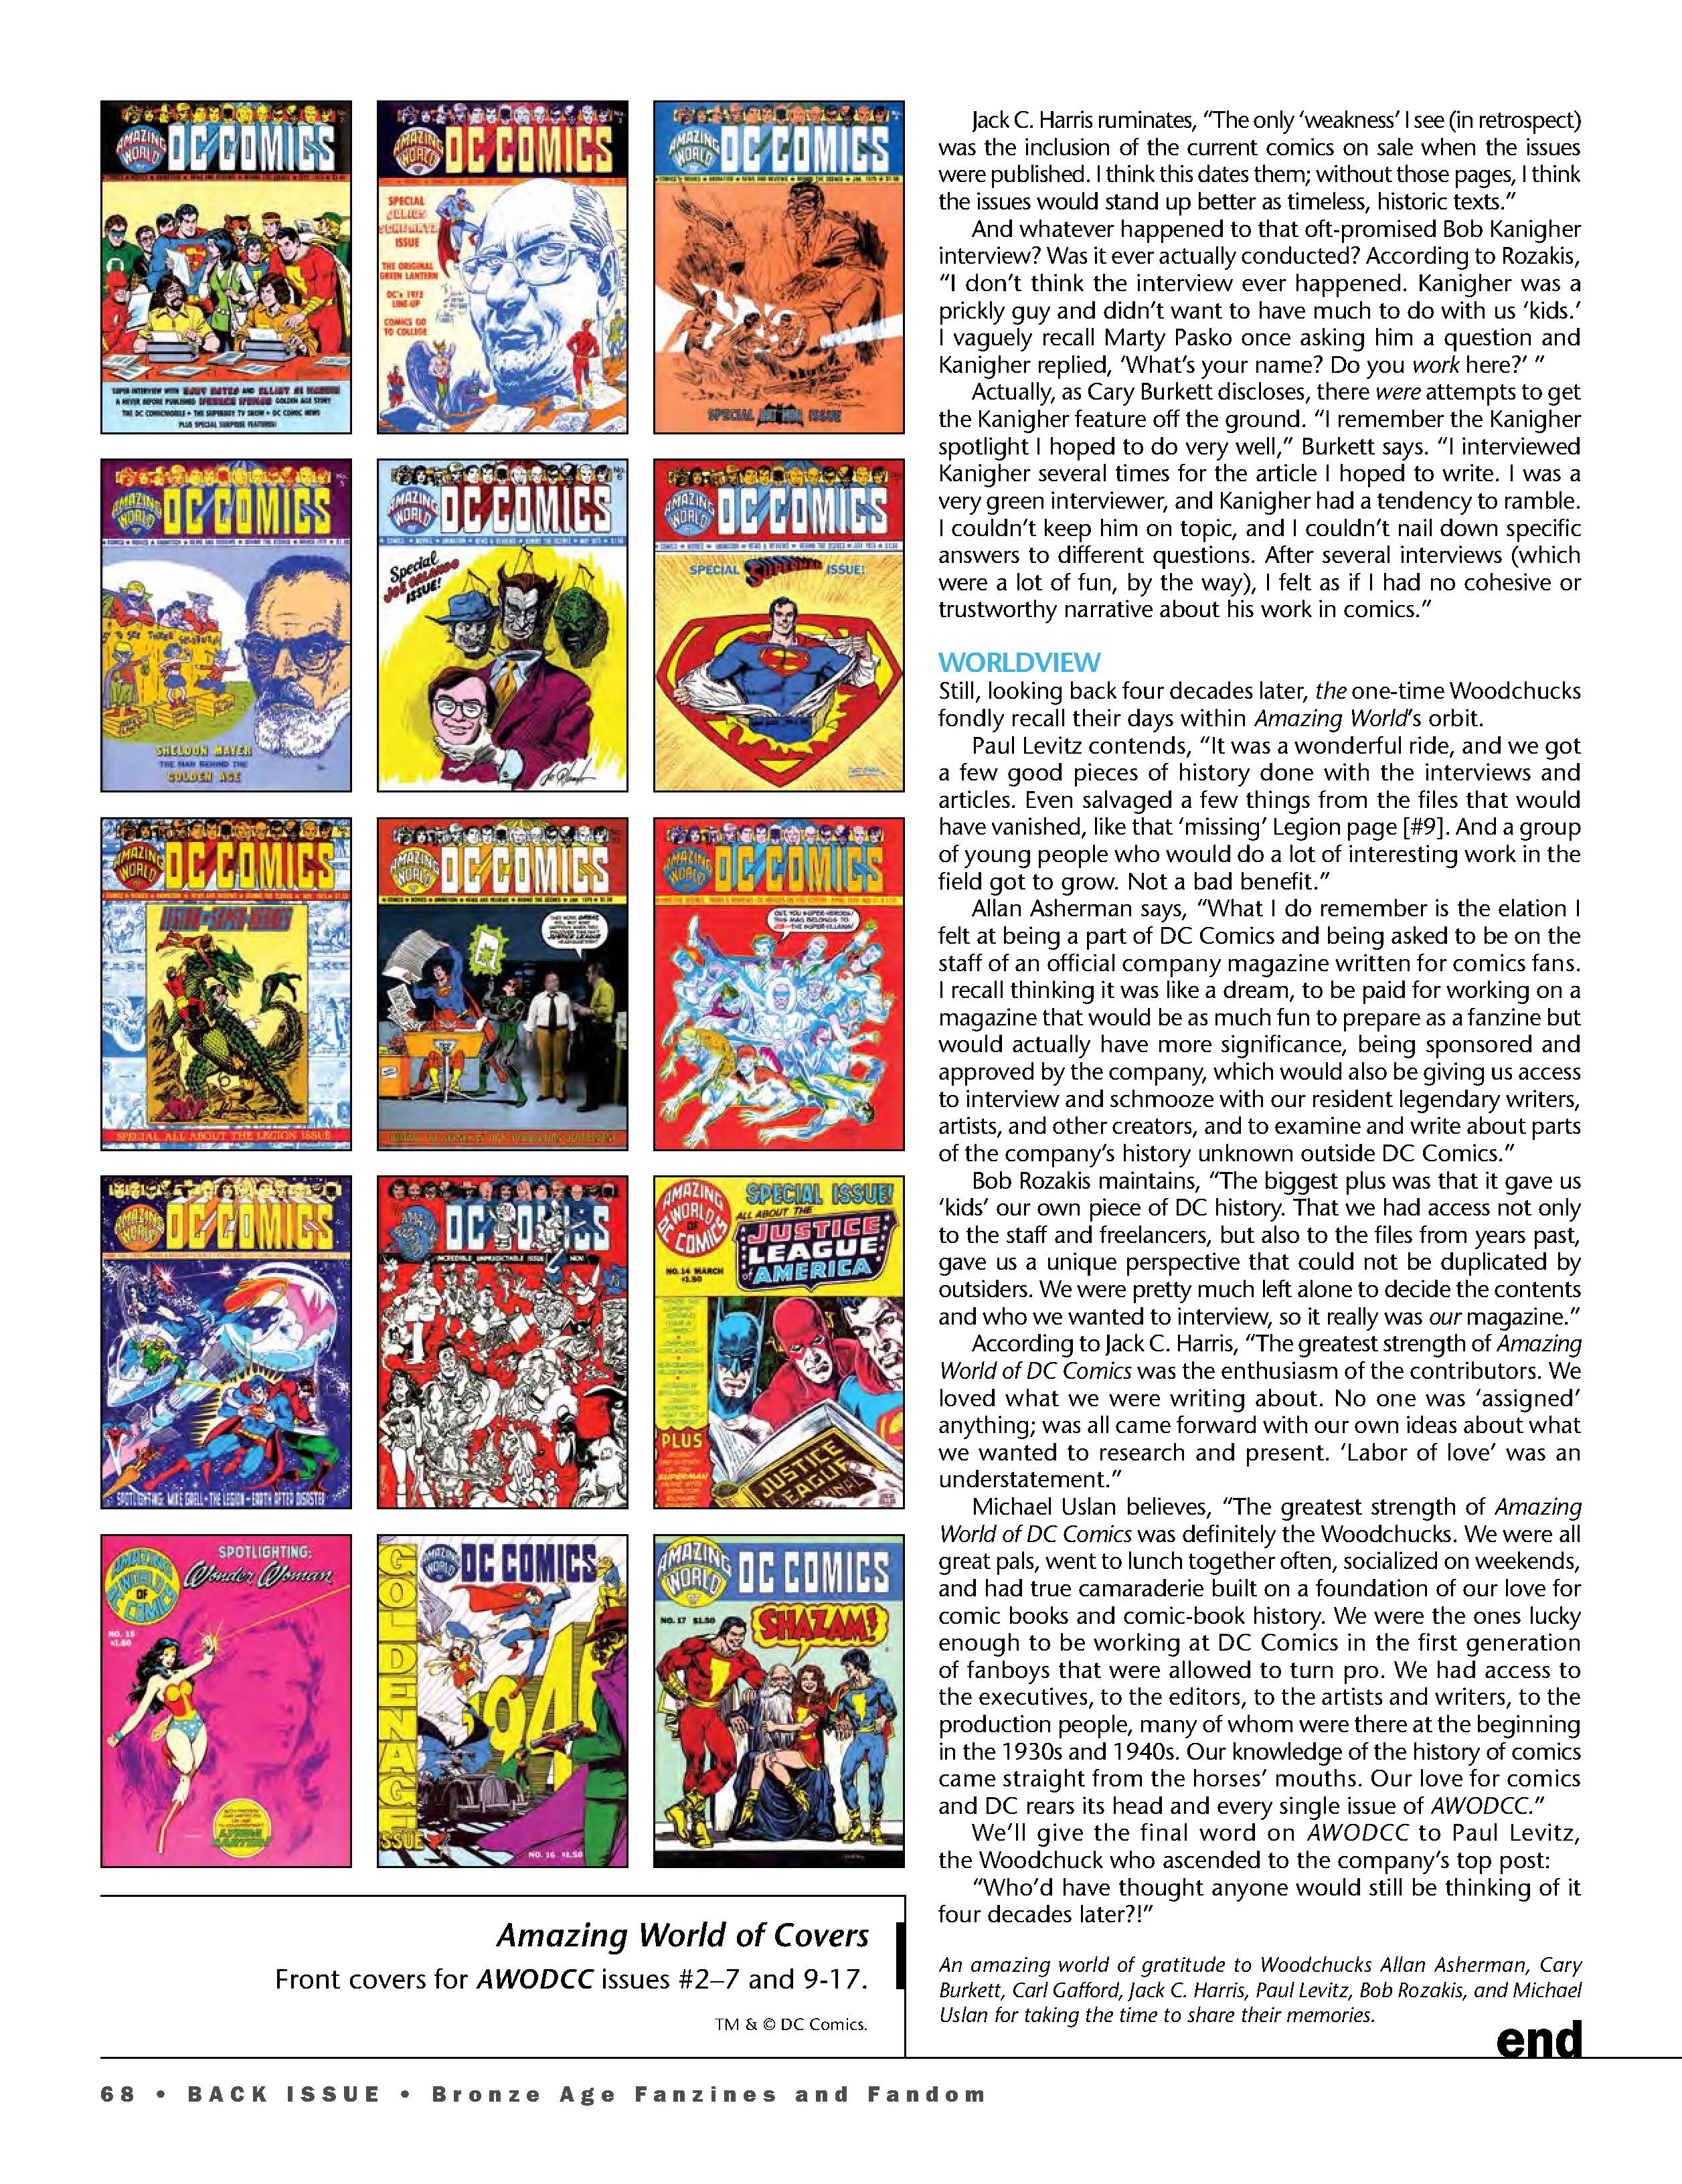 Read online Back Issue comic -  Issue #100 - 70